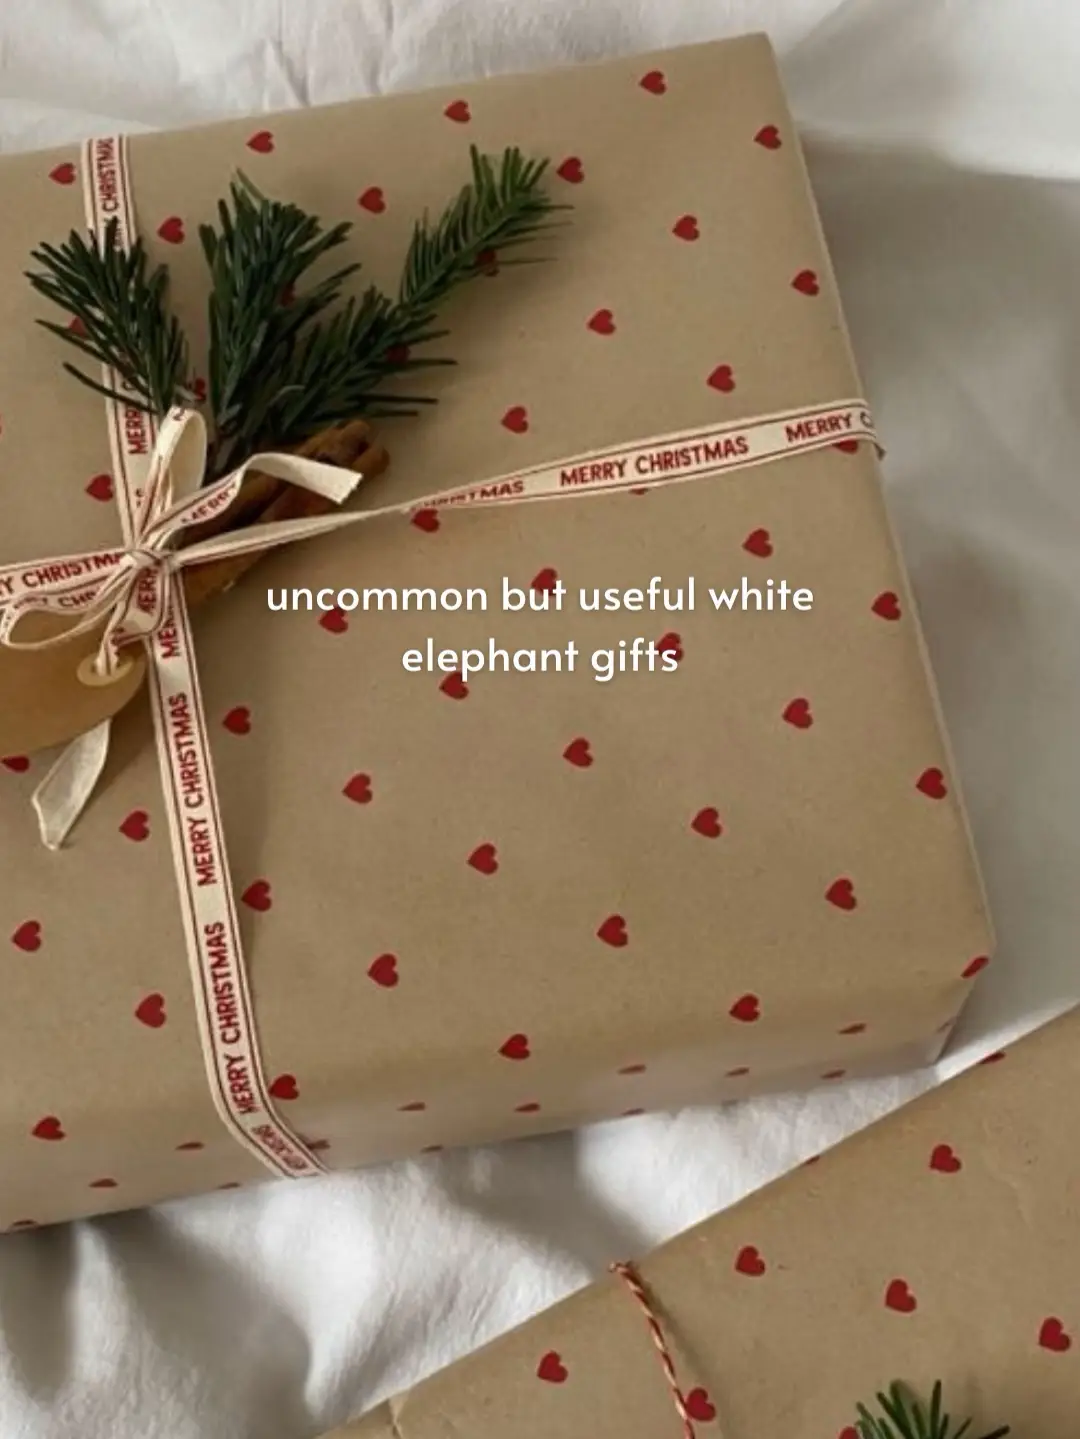 ideas for white elephant gifts - Lemon8 Search